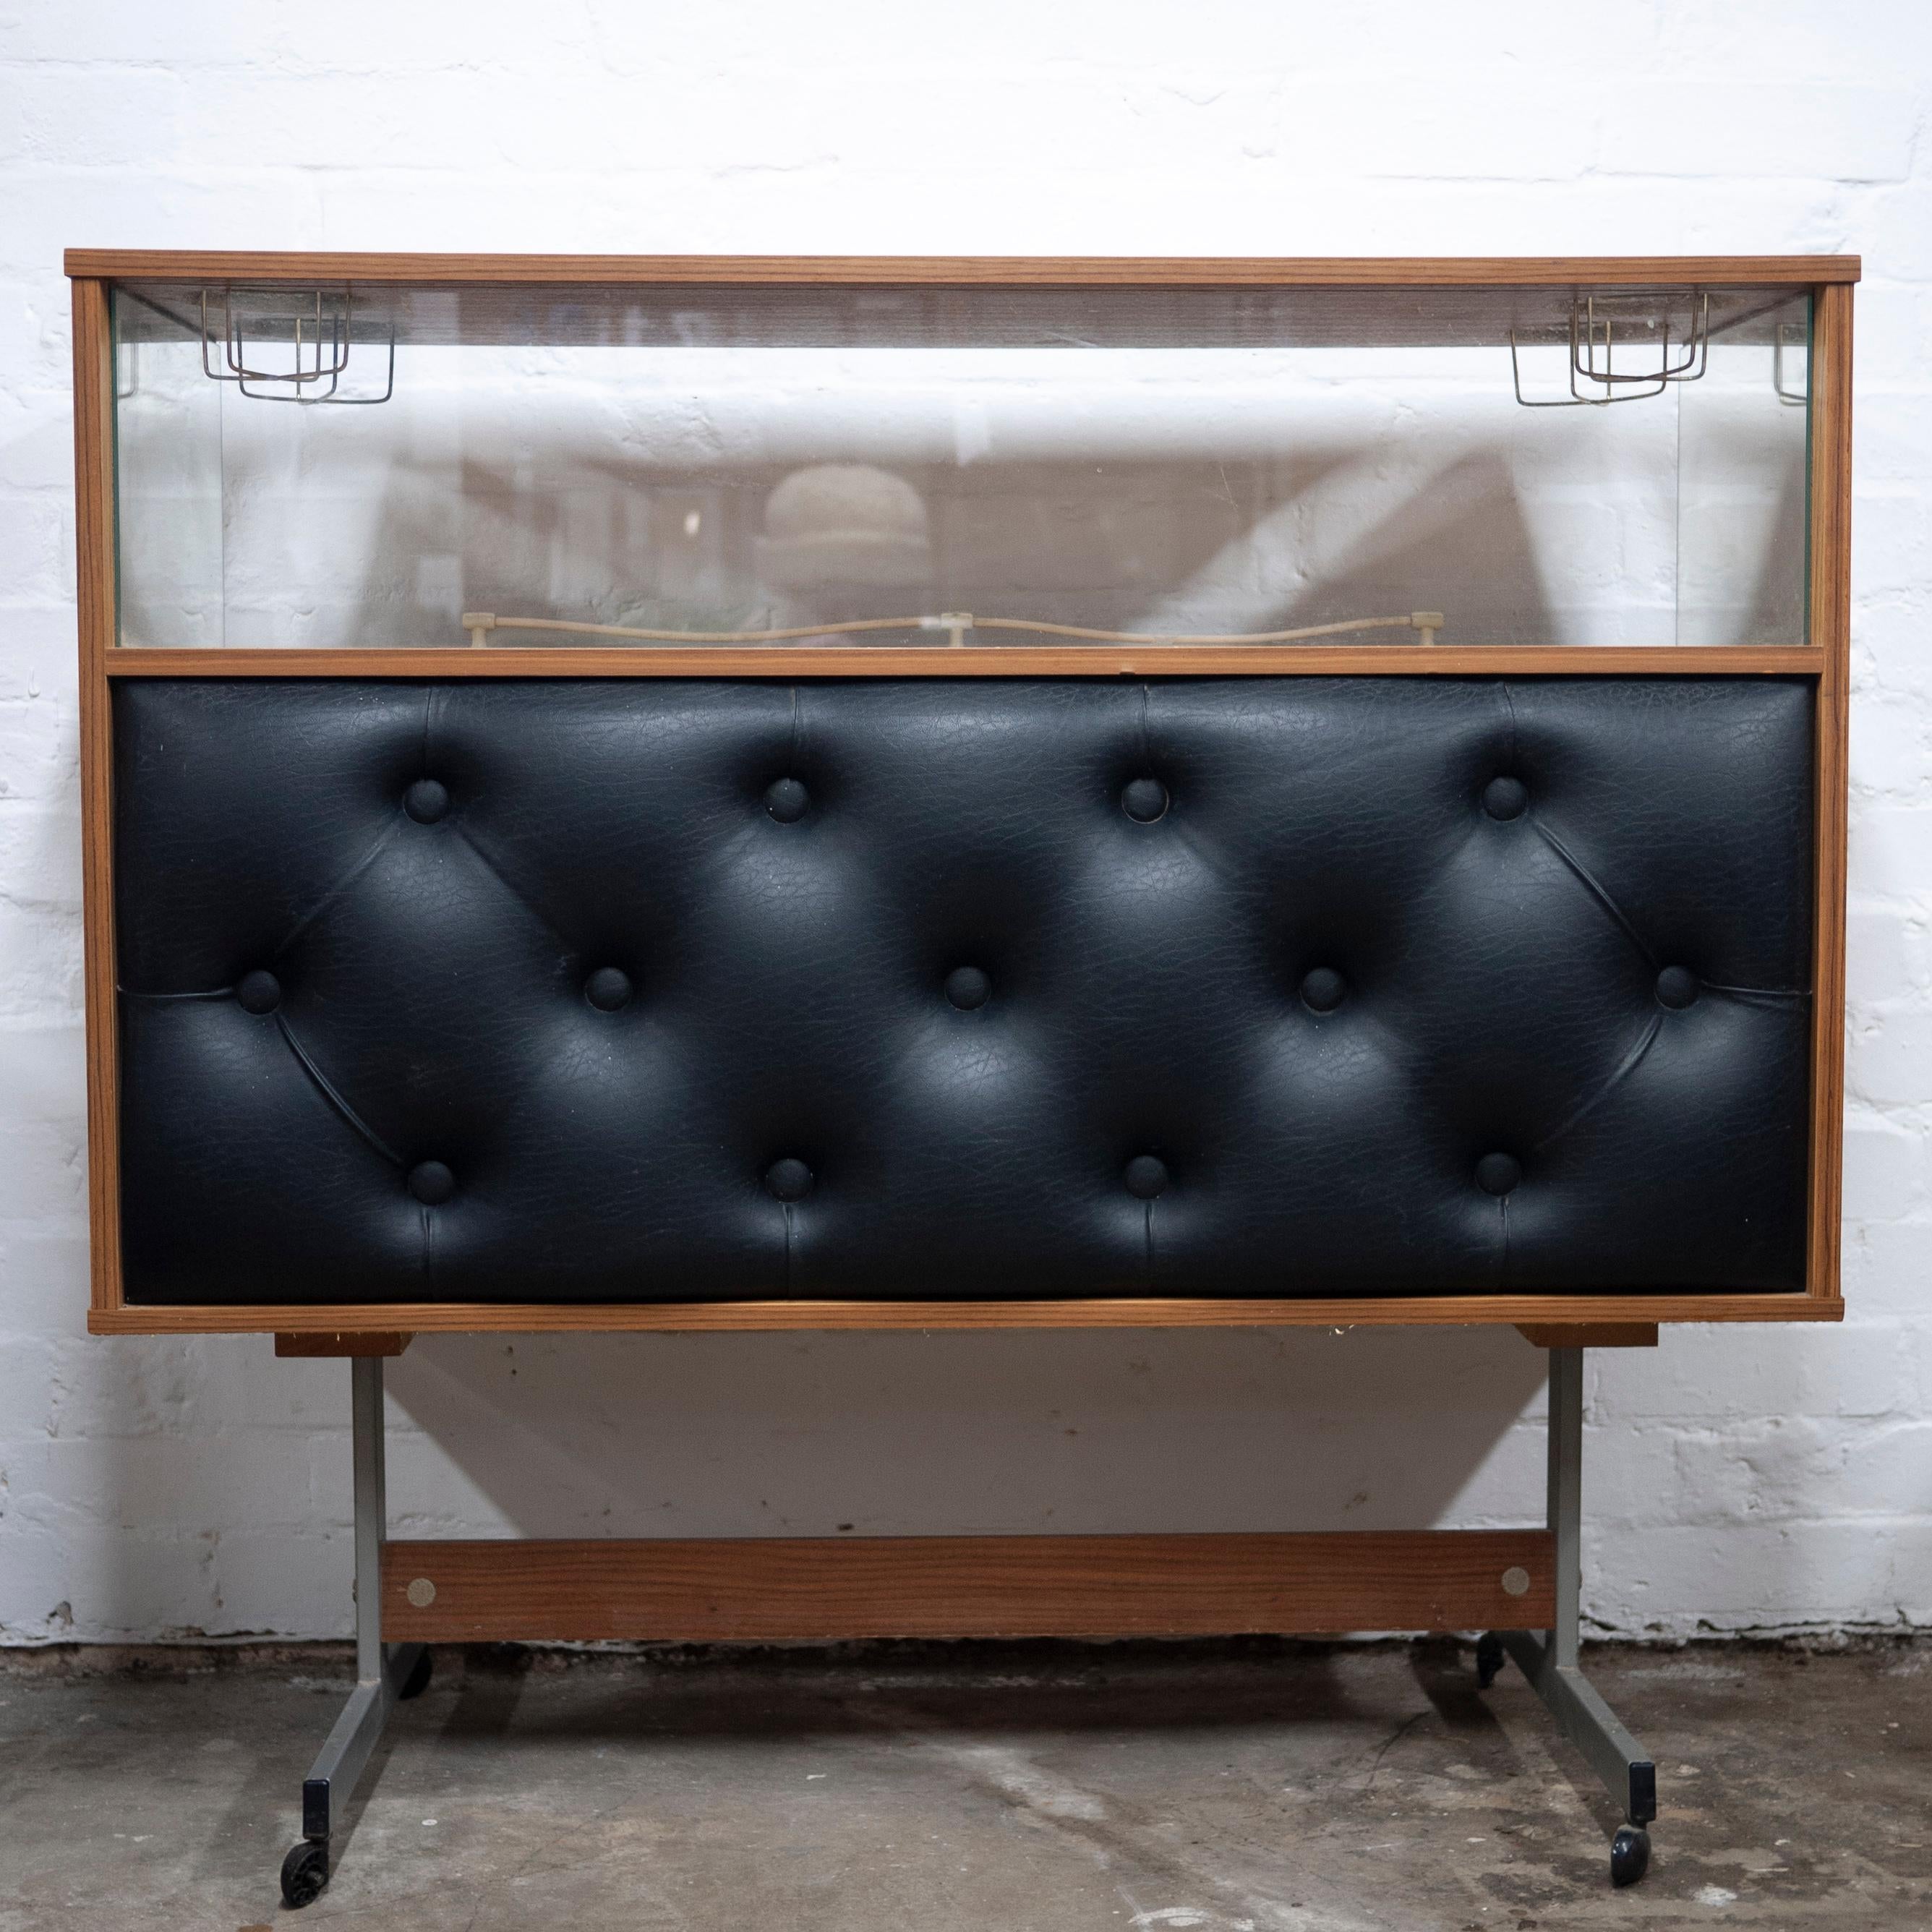 A vintage 1960s home bar with a black vinyl studded front. The bar features 4 top drink holders.

Manufacturer -n/a

Design Period - 1960 to 1969

Country of Manufacture - Unknown

Style - Vintage

Detailed Condition - Good with minimal